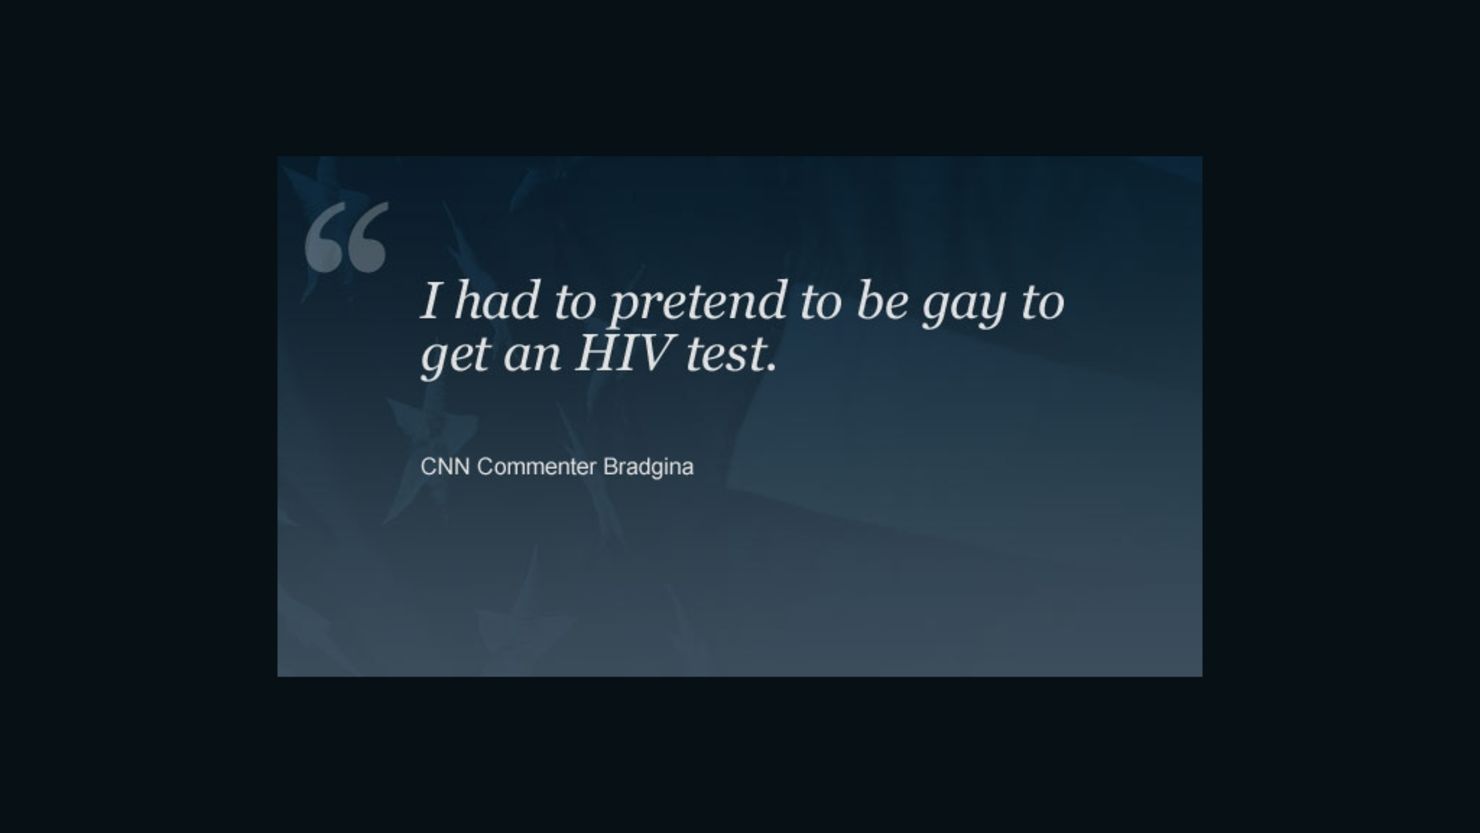 One commenter on a story about youths and HIV testing said they didn't find it easy to obtain an HIV test.